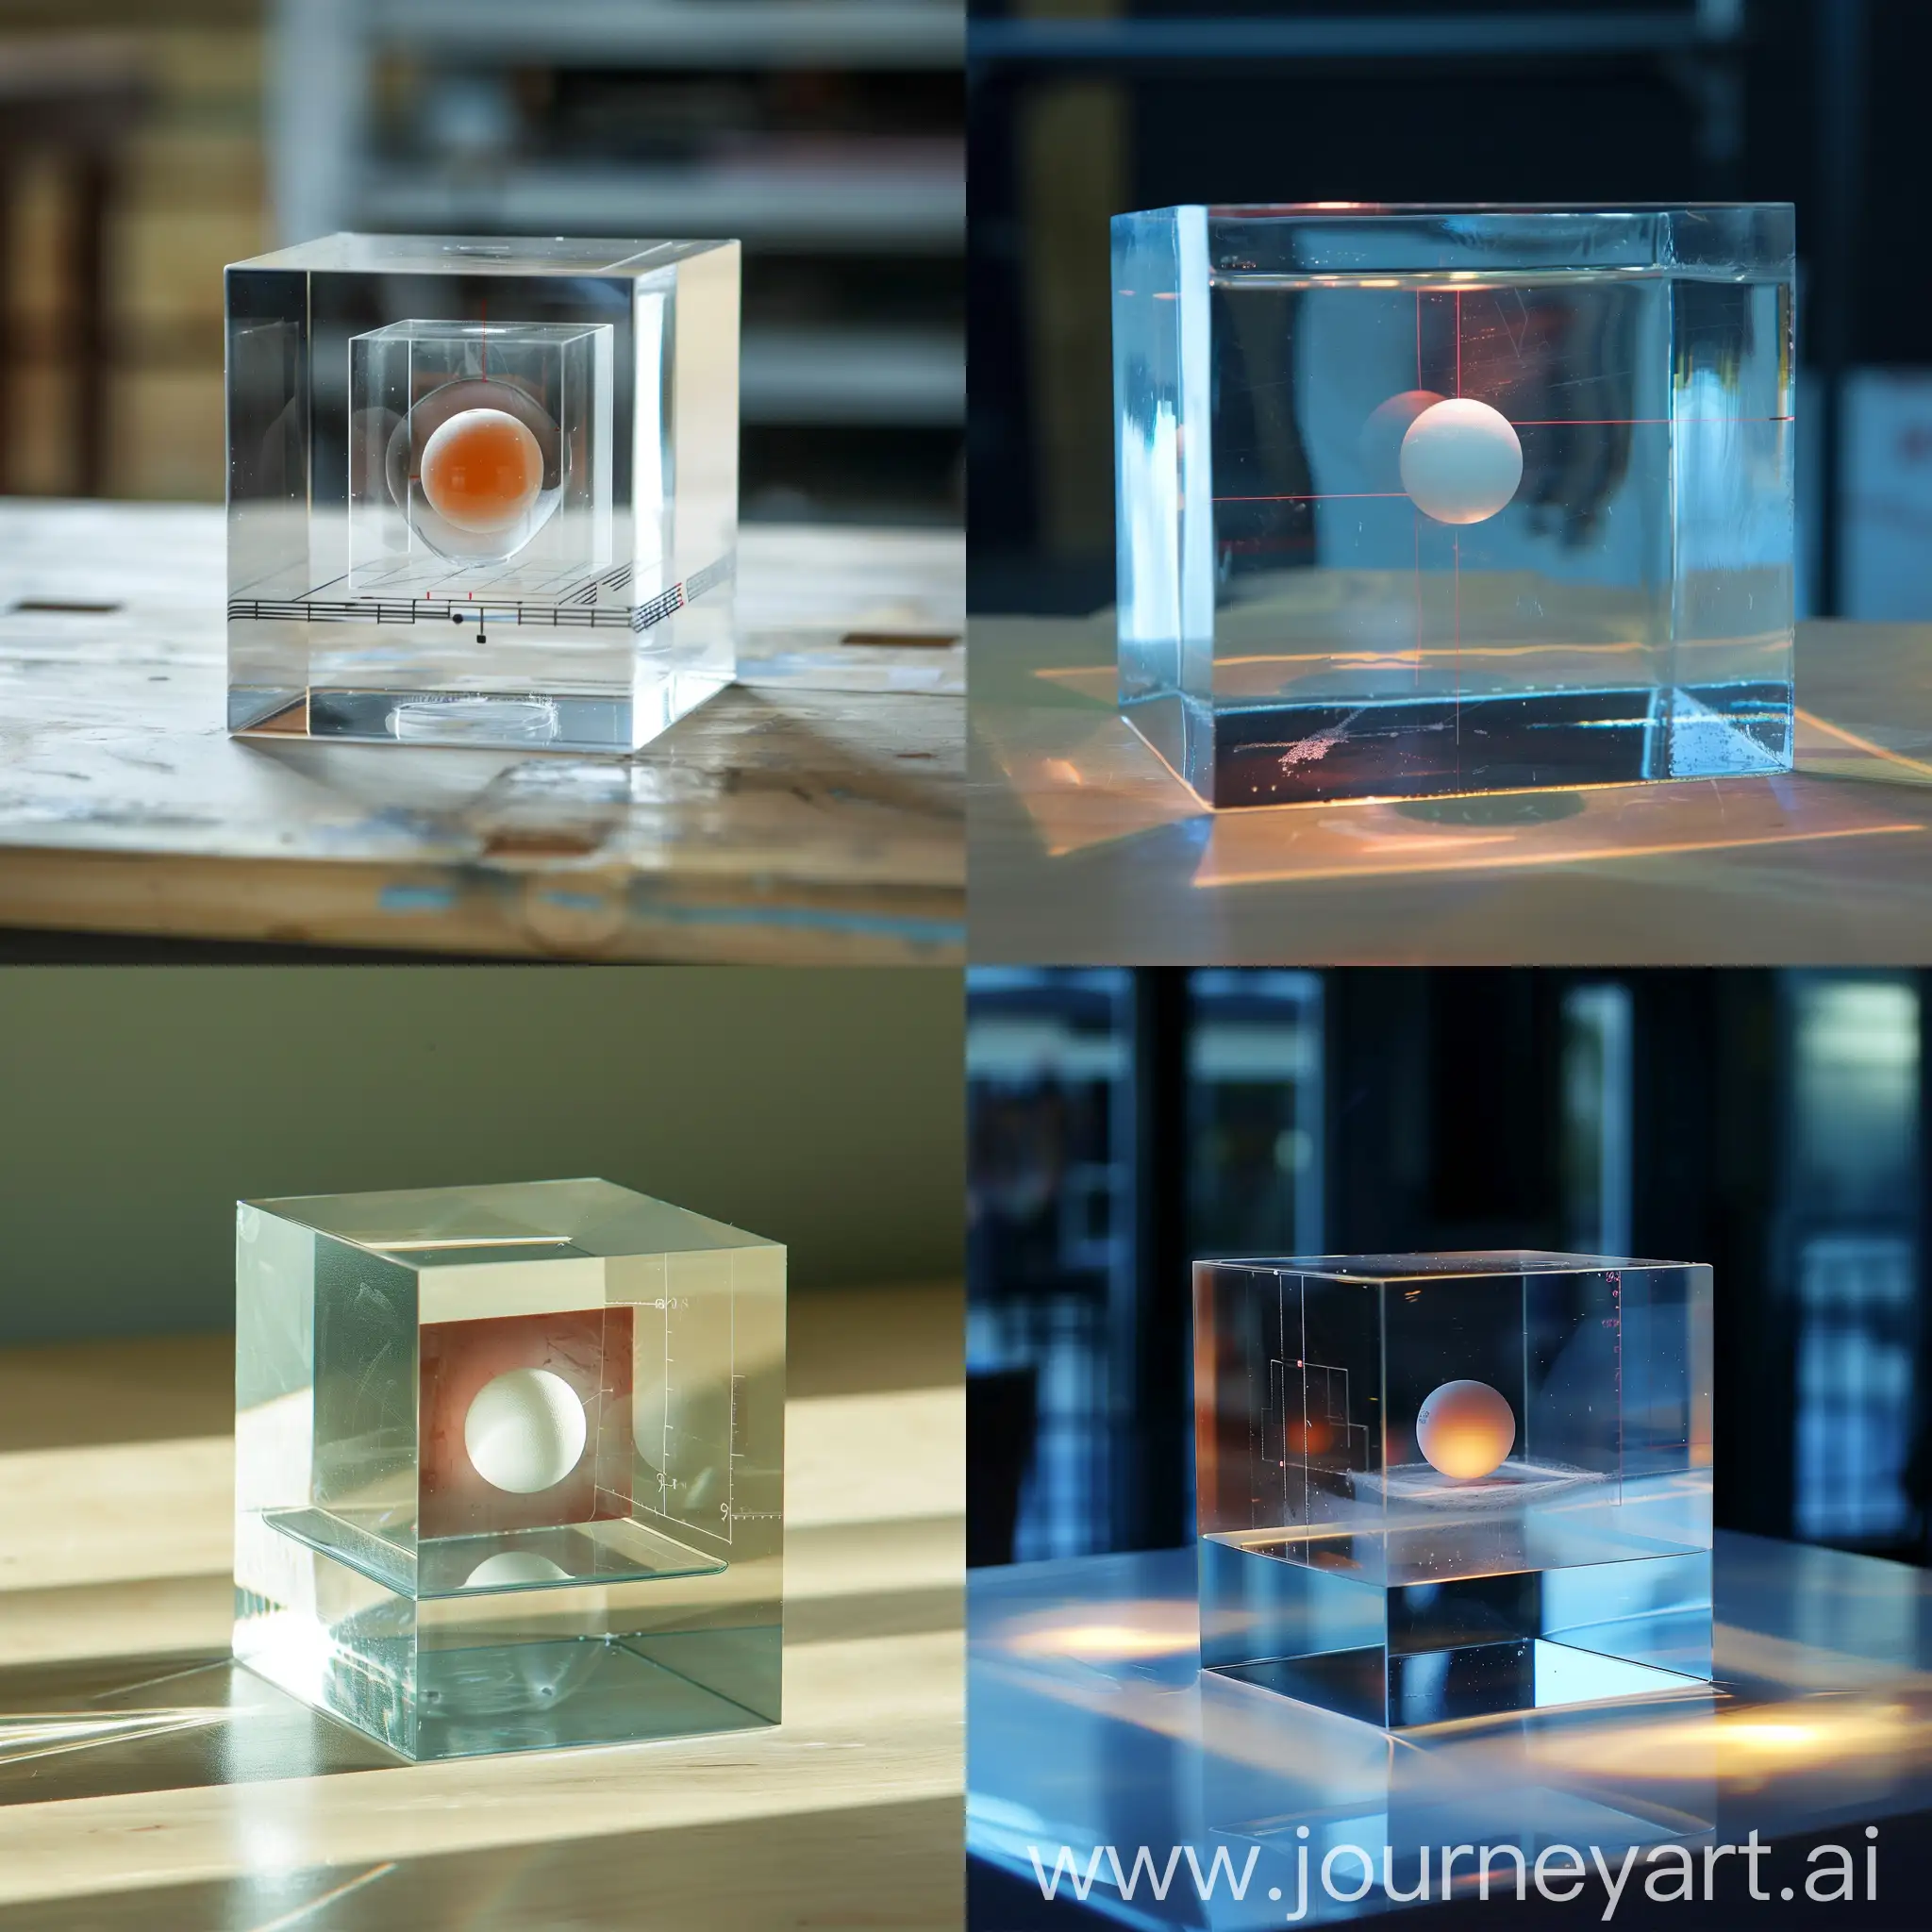 Ping-Pong-Ball-in-Glass-Cube-Precision-Measurement-Experiment